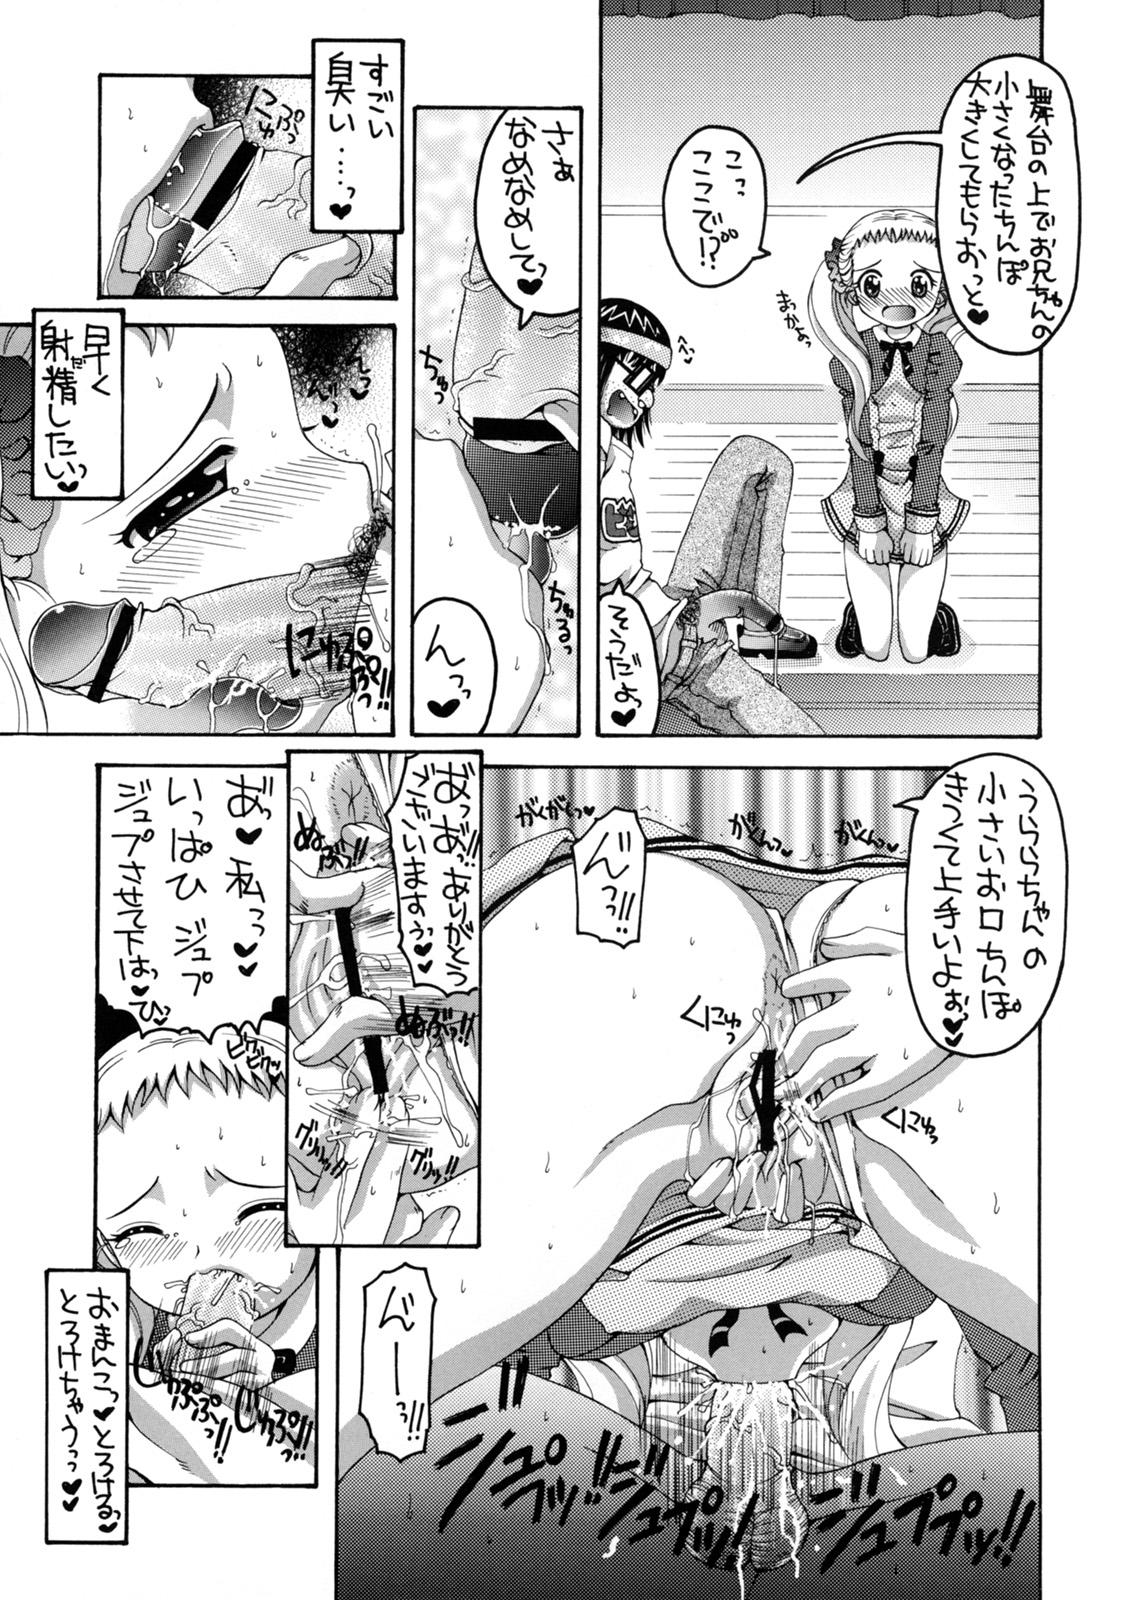 Stranger Yes! Five 3 - Pretty cure Yes precure 5 Puto - Page 6